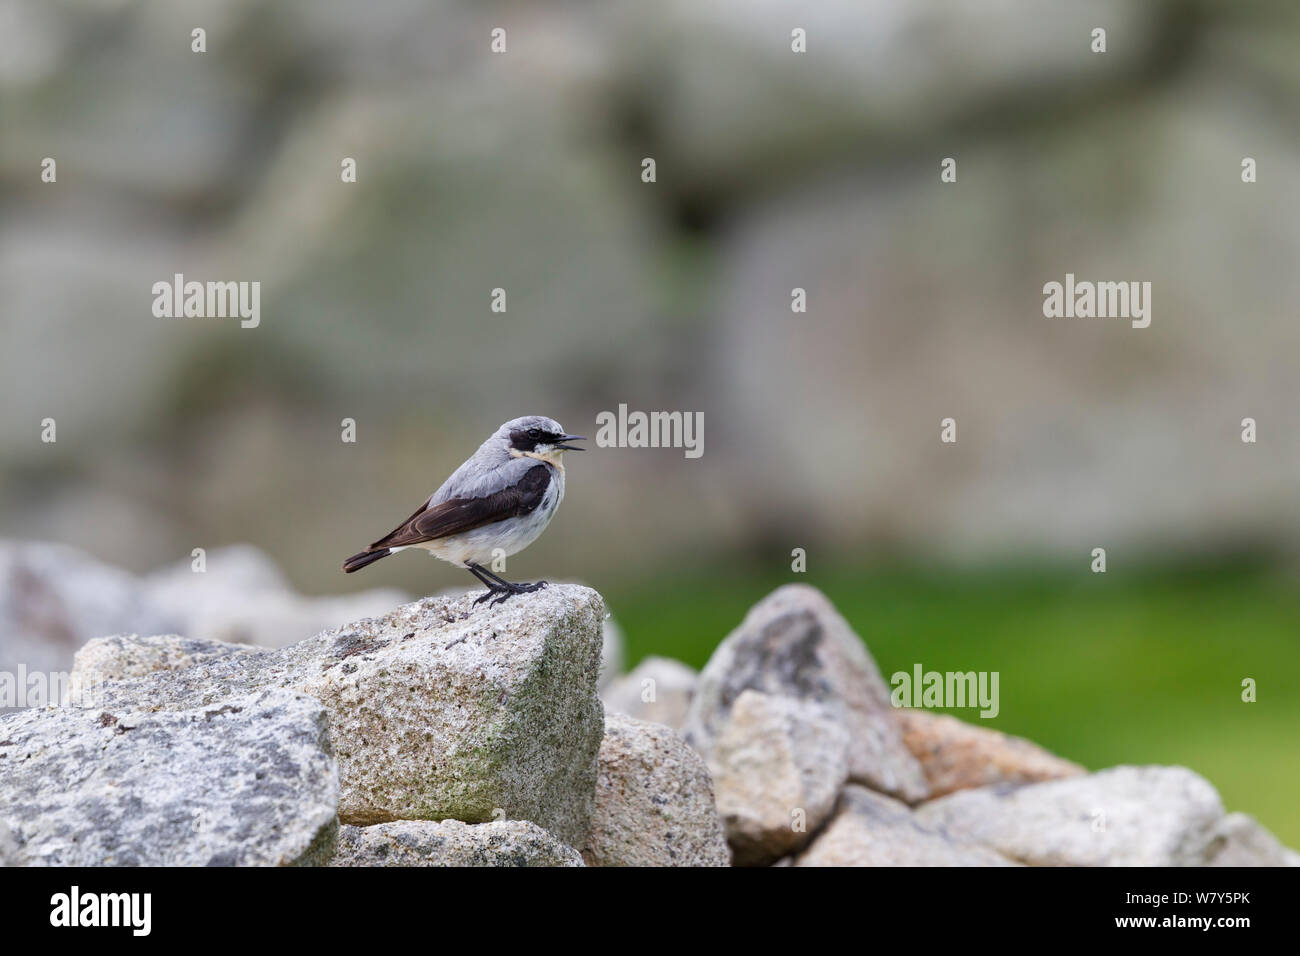 Adult male Northern wheatear (Oenanthe oenanthe) in worn breeding plumage, calling with bill open, from a stone wall. St Kilda, Outer Hebrides, Scotland. June. Stock Photo